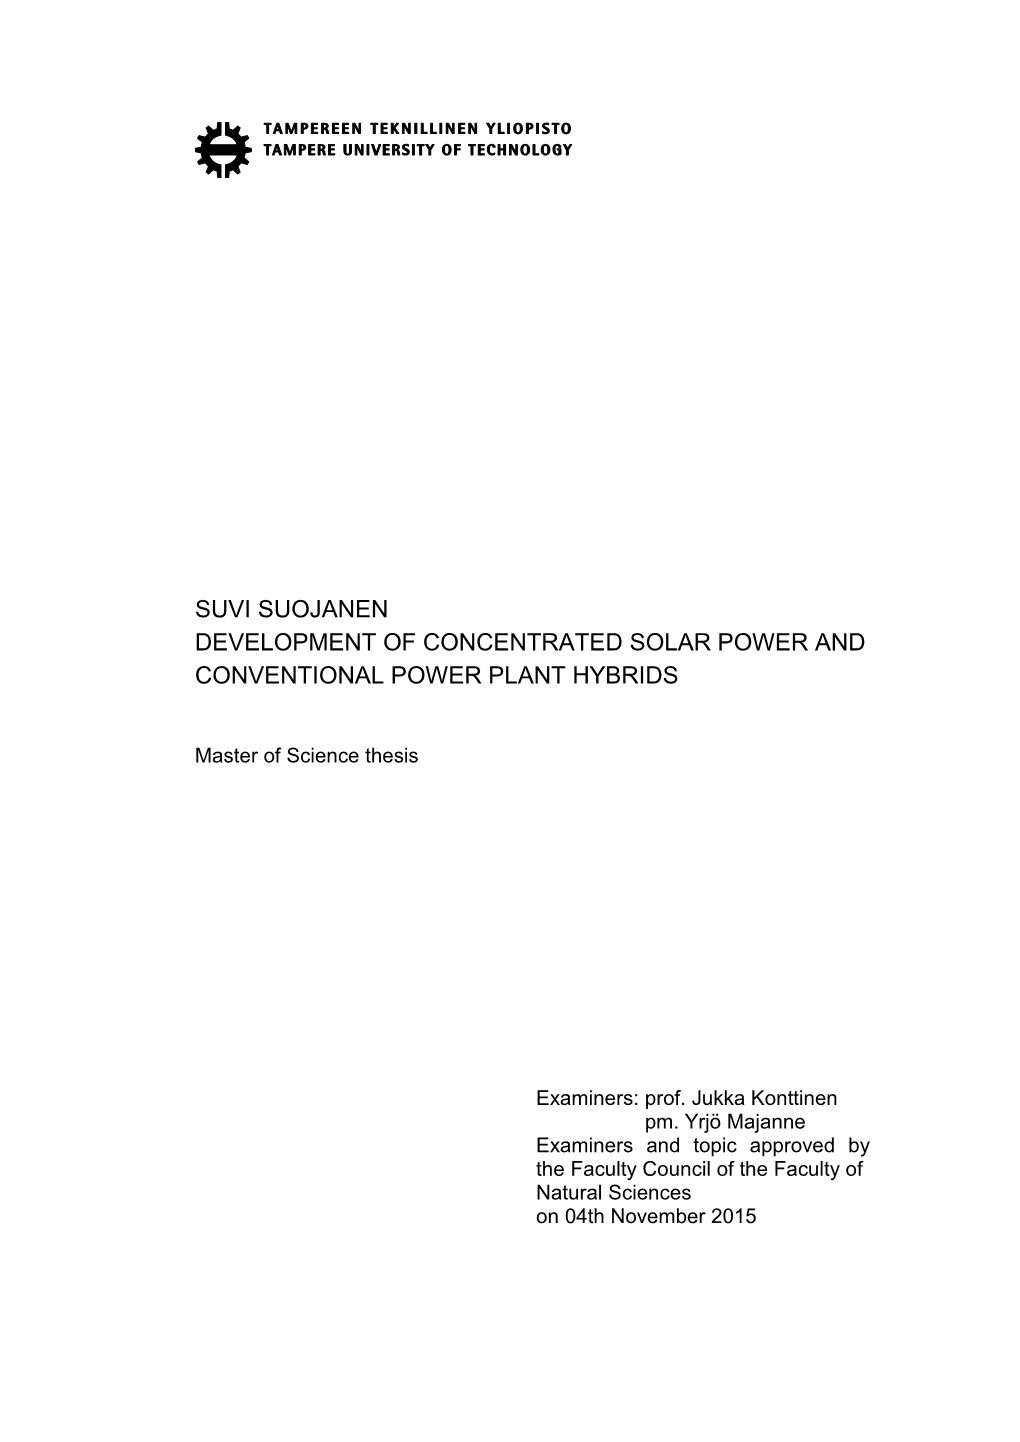 Suvi Suojanen Development of Concentrated Solar Power and Conventional Power Plant Hybrids